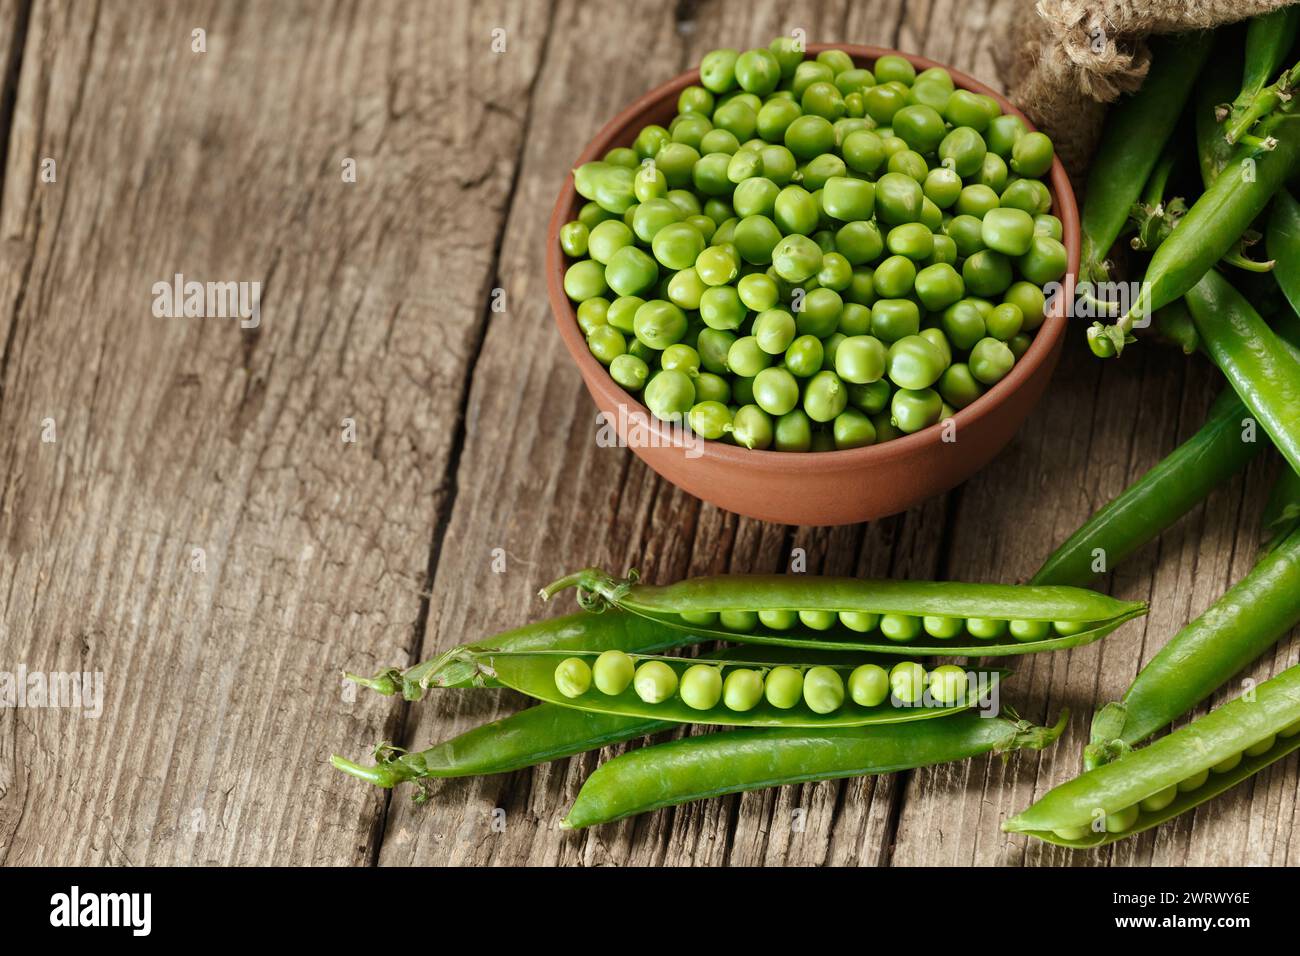 Pods of fresh green peas in a burlap bag, shelled peas in a clay bowl, sweet organic green peas in closed and open pods on an aged wooden background. Stock Photo